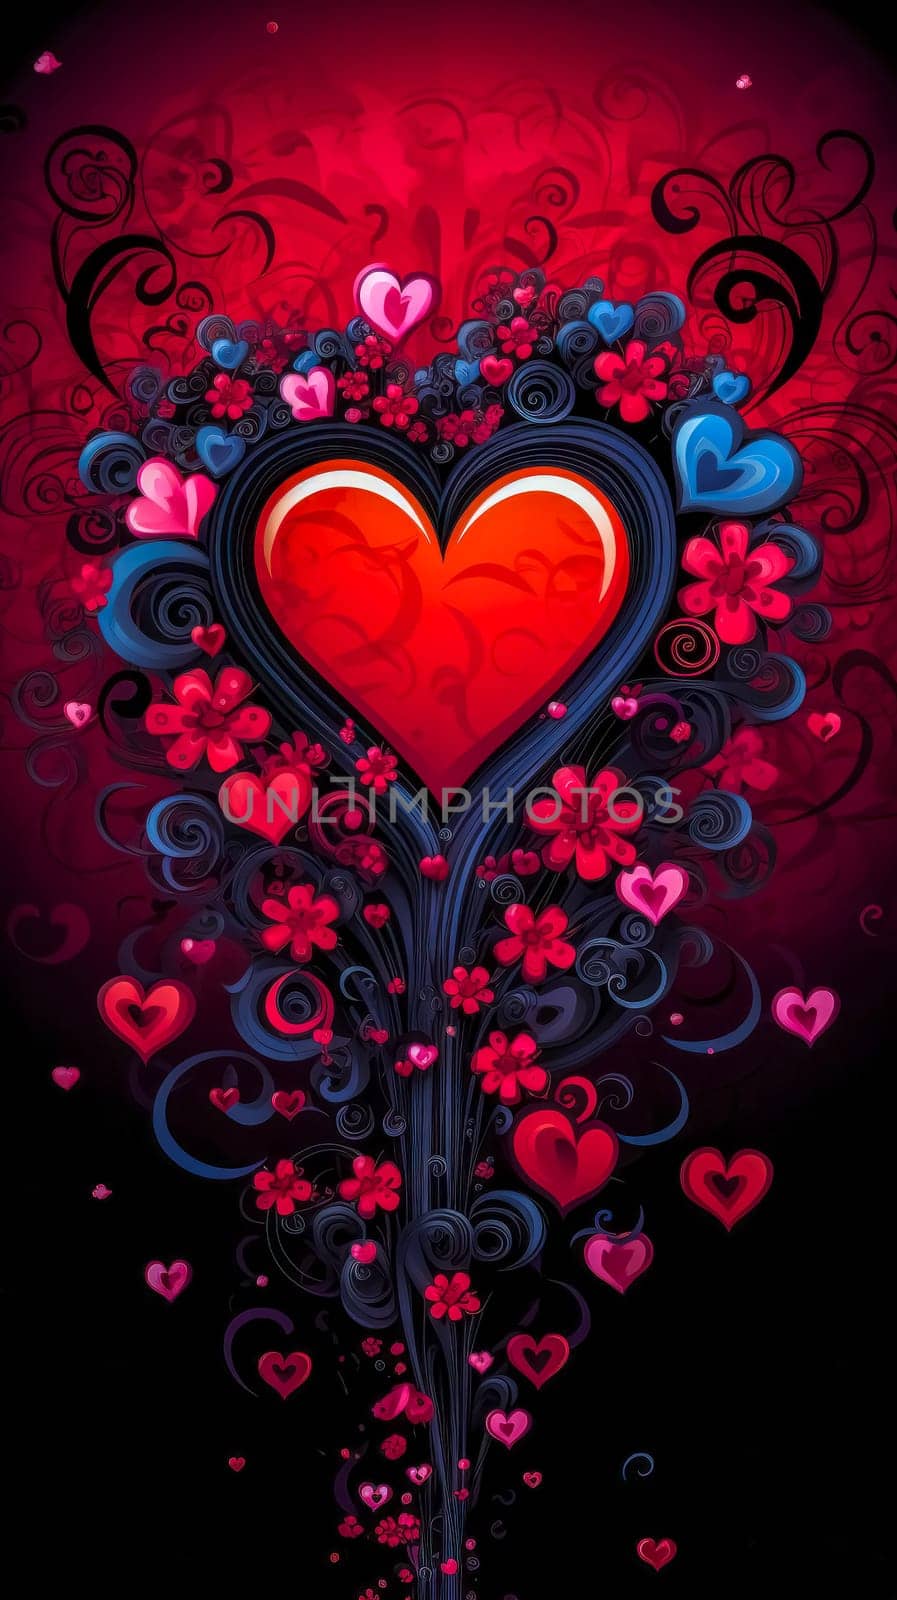 vivid artistic display featuring a central red heart surrounded by an array of smaller hearts and floral designs in shades of pink and blue, set against a dark backdrop. vertical